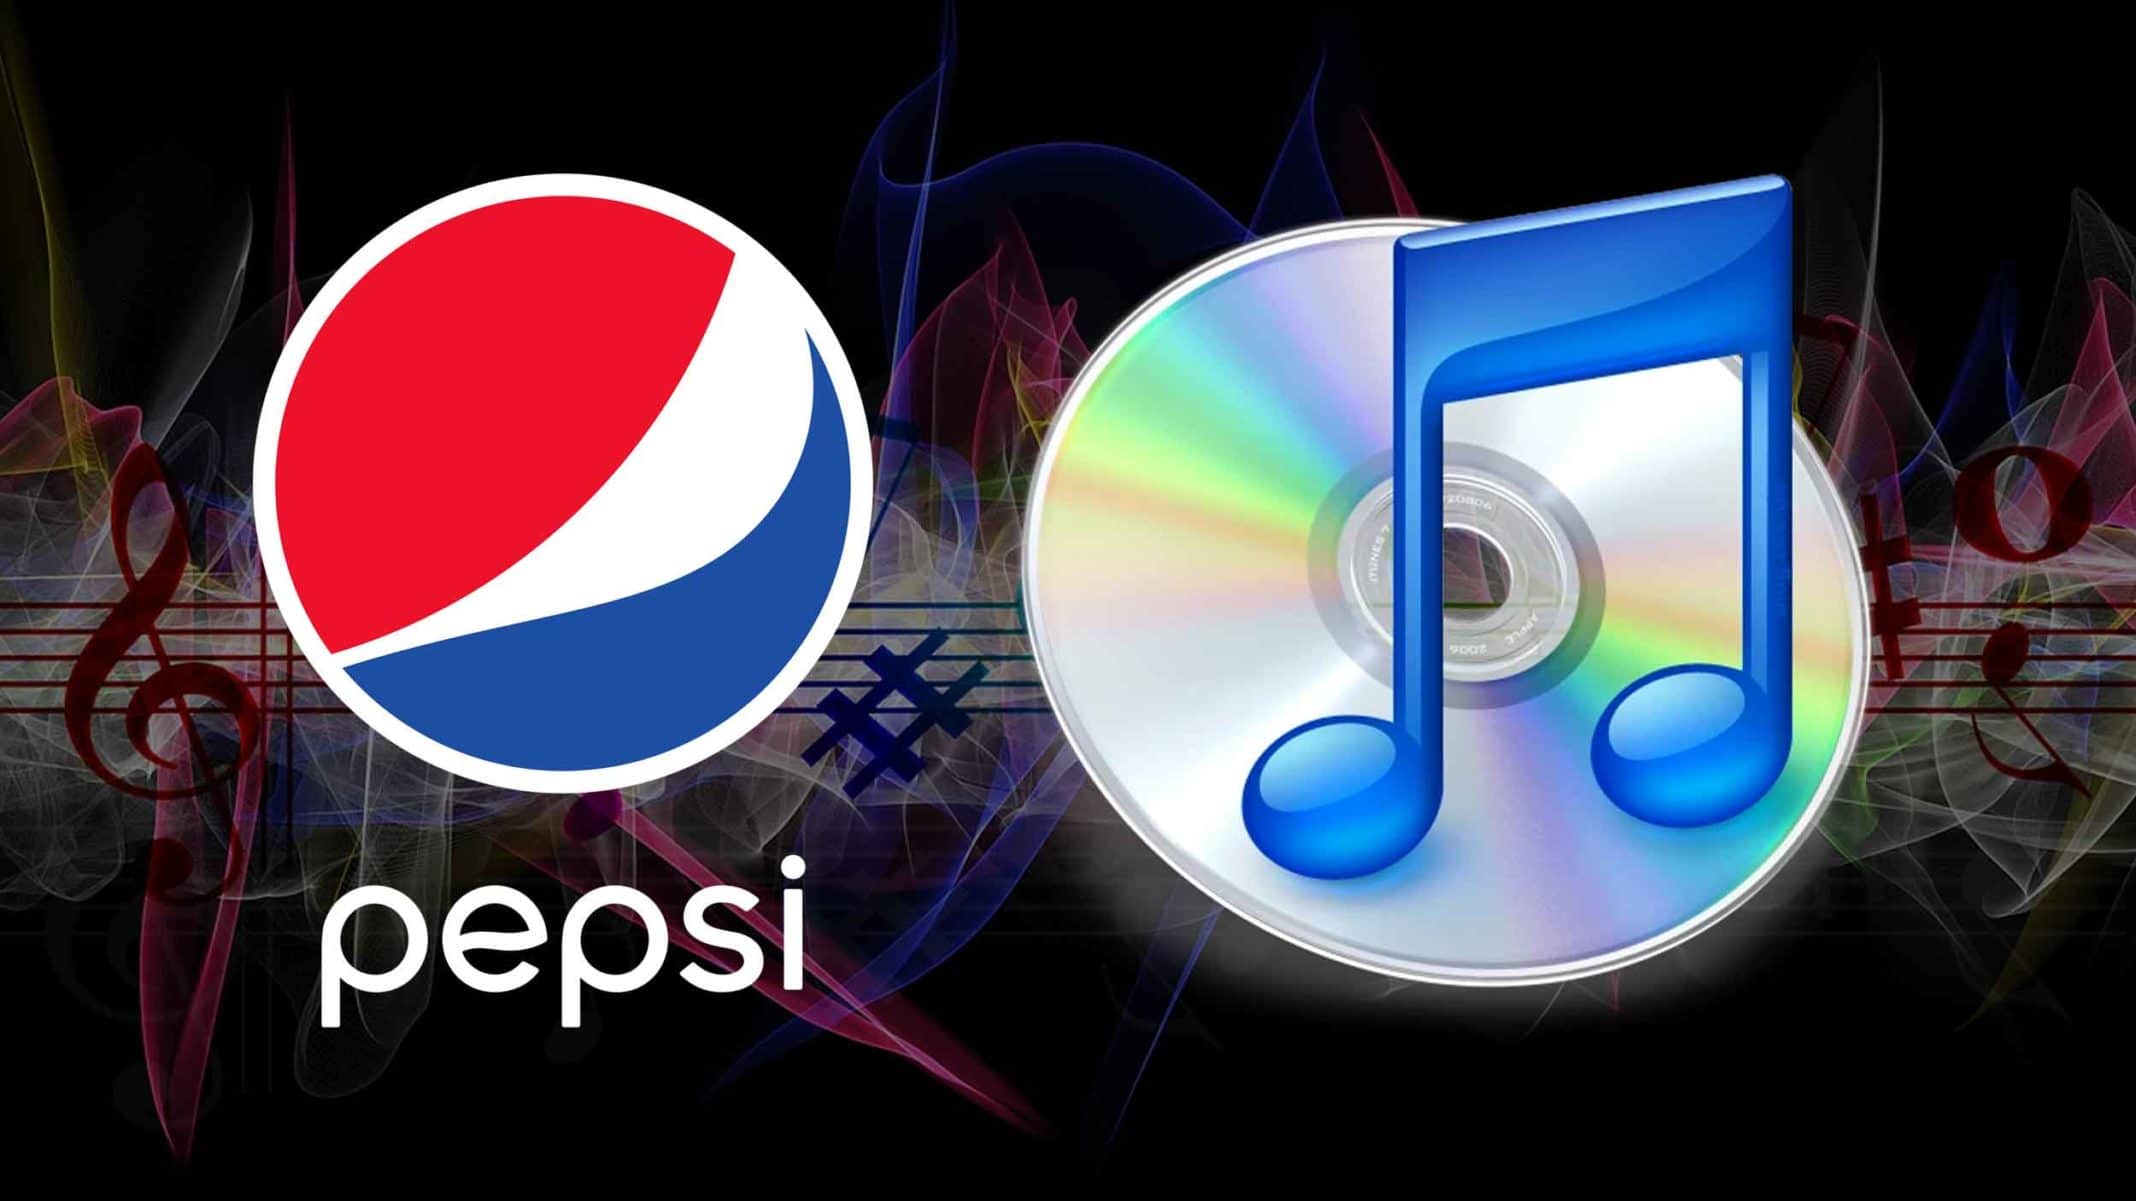 Pepsi iTunes Deadline For Free Song Downloads: May 23, 2005